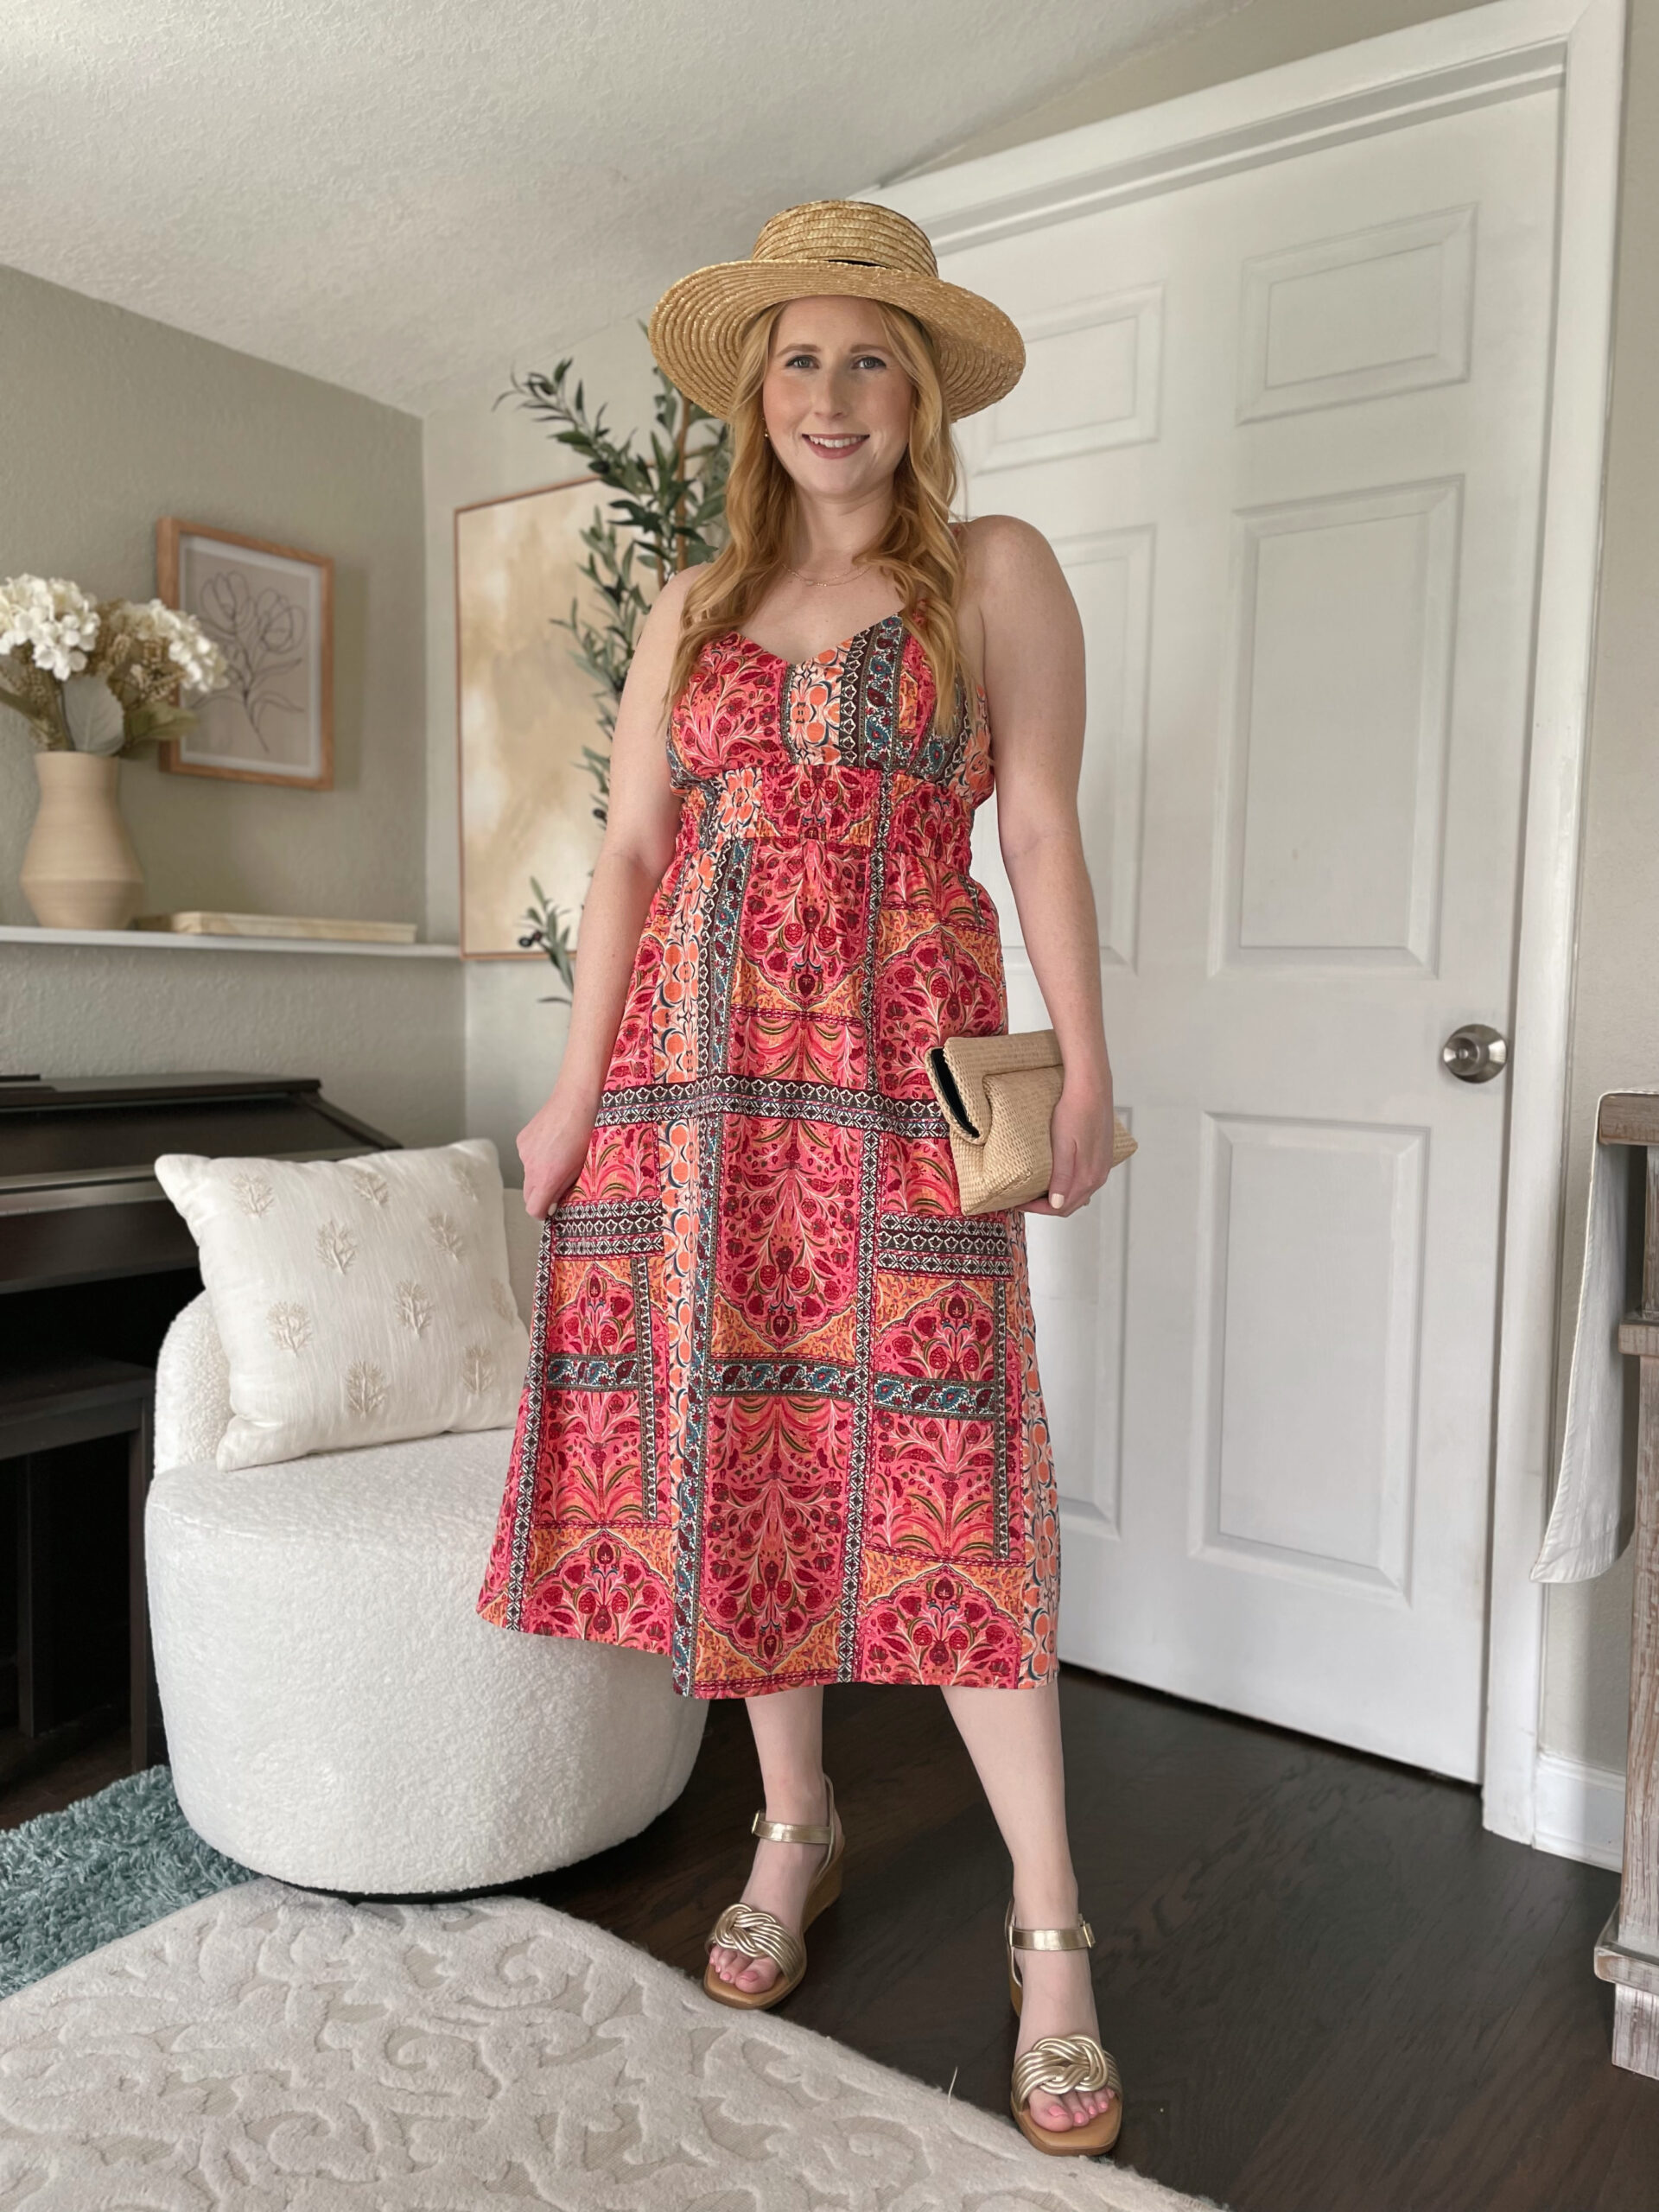 Waist-Defined Cami Midi Dress at Old Navy | New Women's Styles For Spring | Light & Airy Styles For Spring at Old Navy - Affordable by Amanda